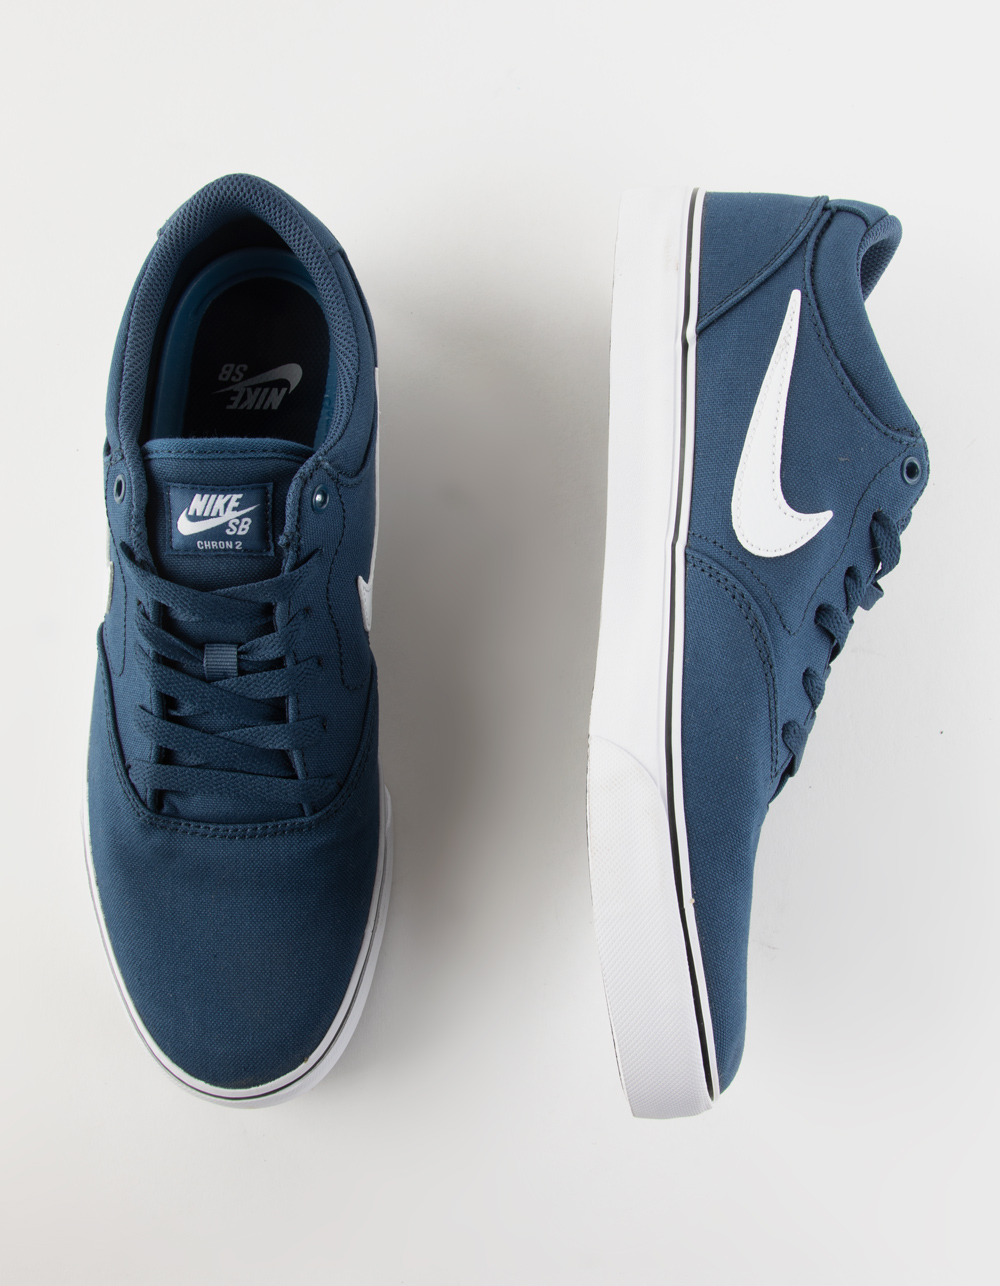 NIKE Canvas Shoes - NAVY |